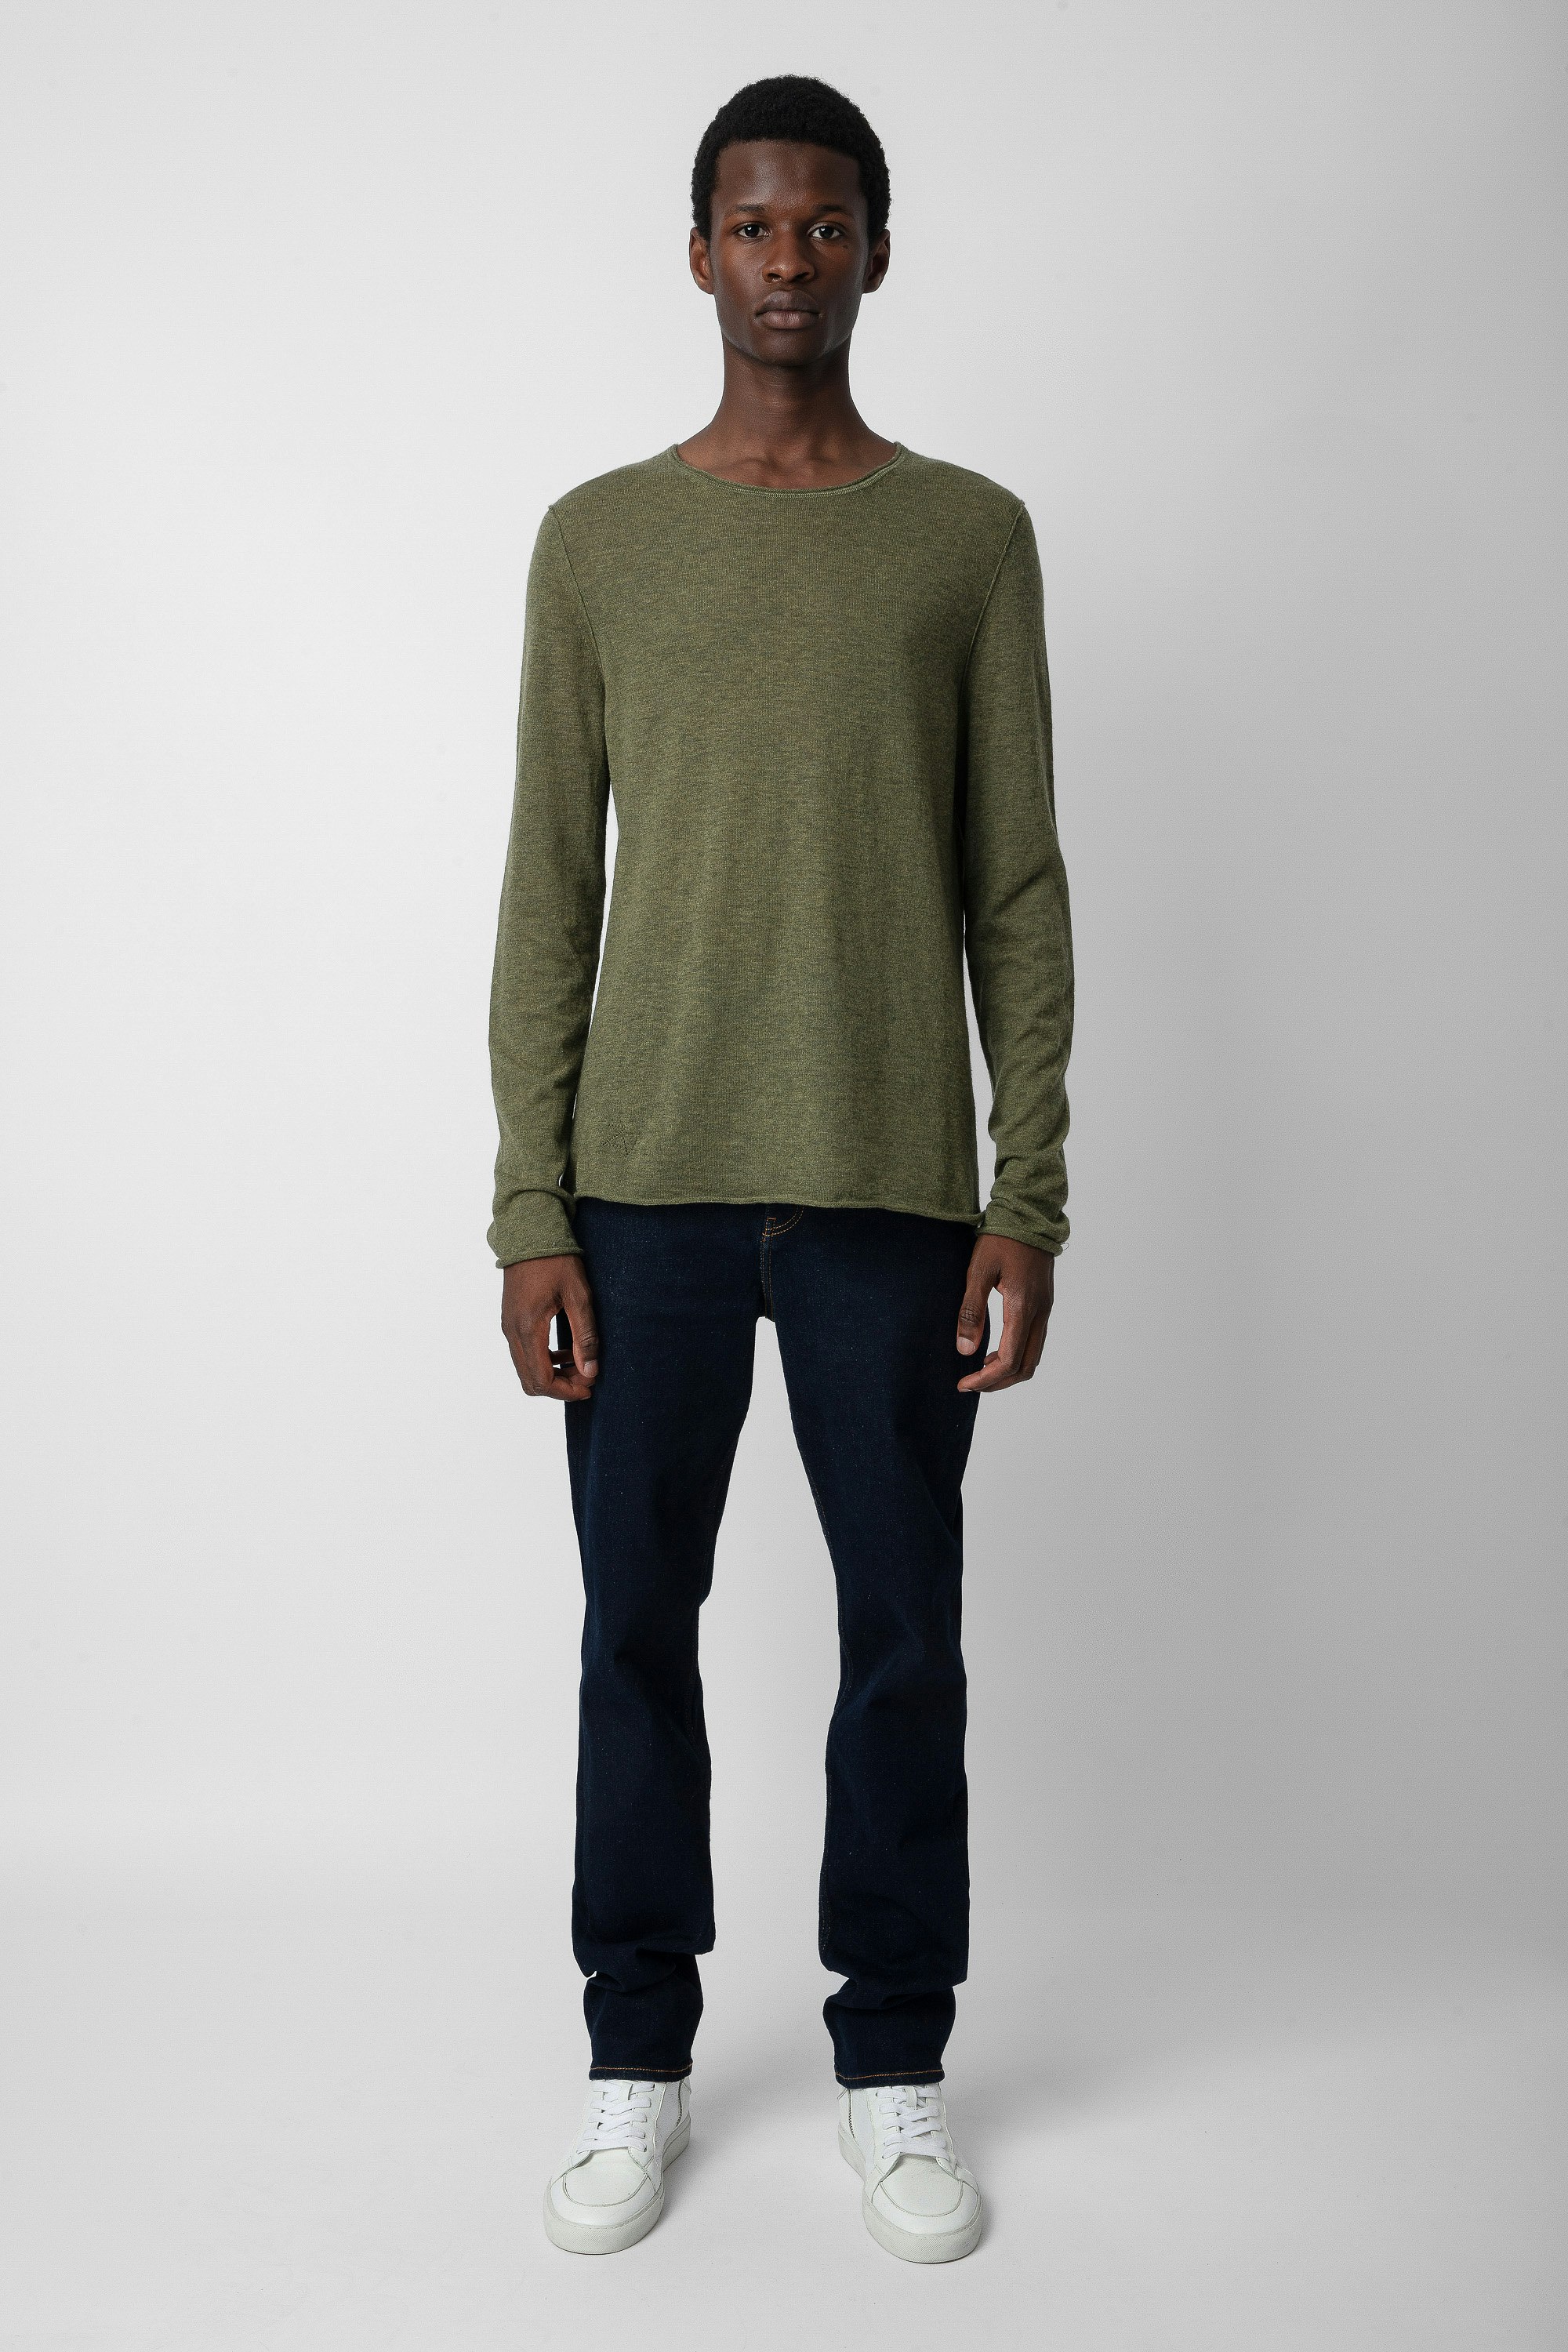 Teiss Sweater  - Men’s khaki feather cashmere sweater.